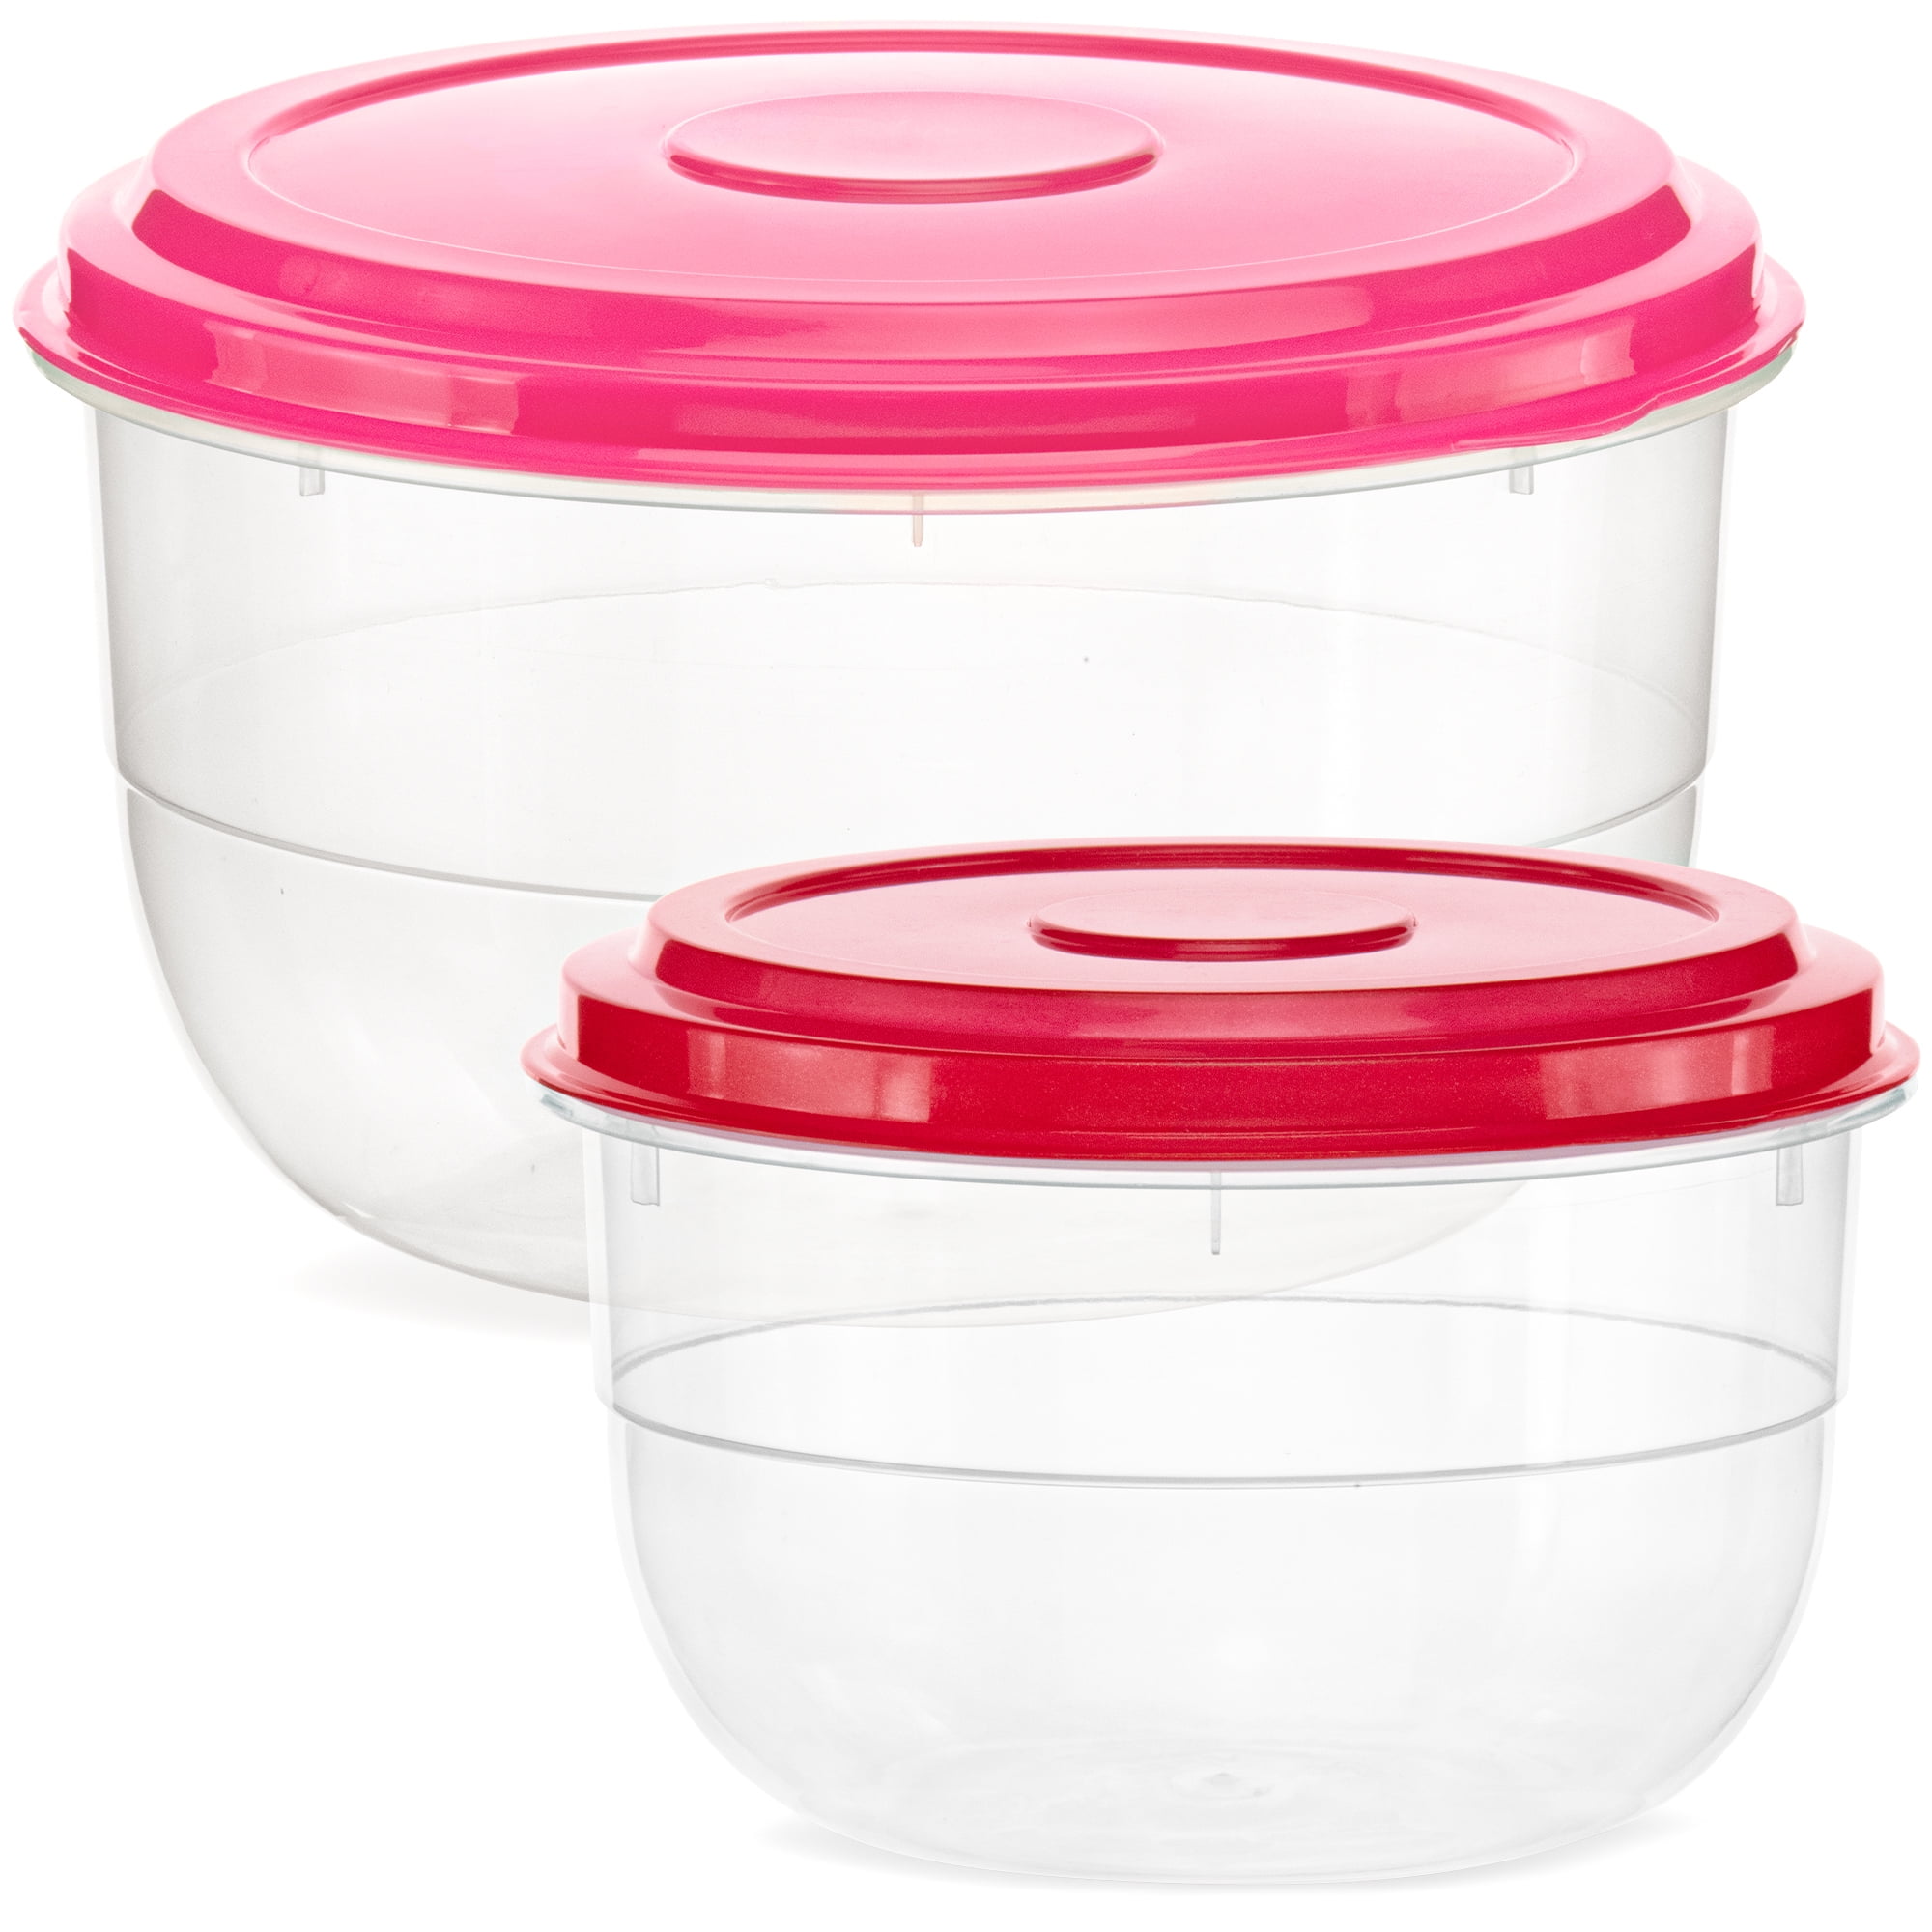  DecorRack Extra Large Food Storage Container with Lid